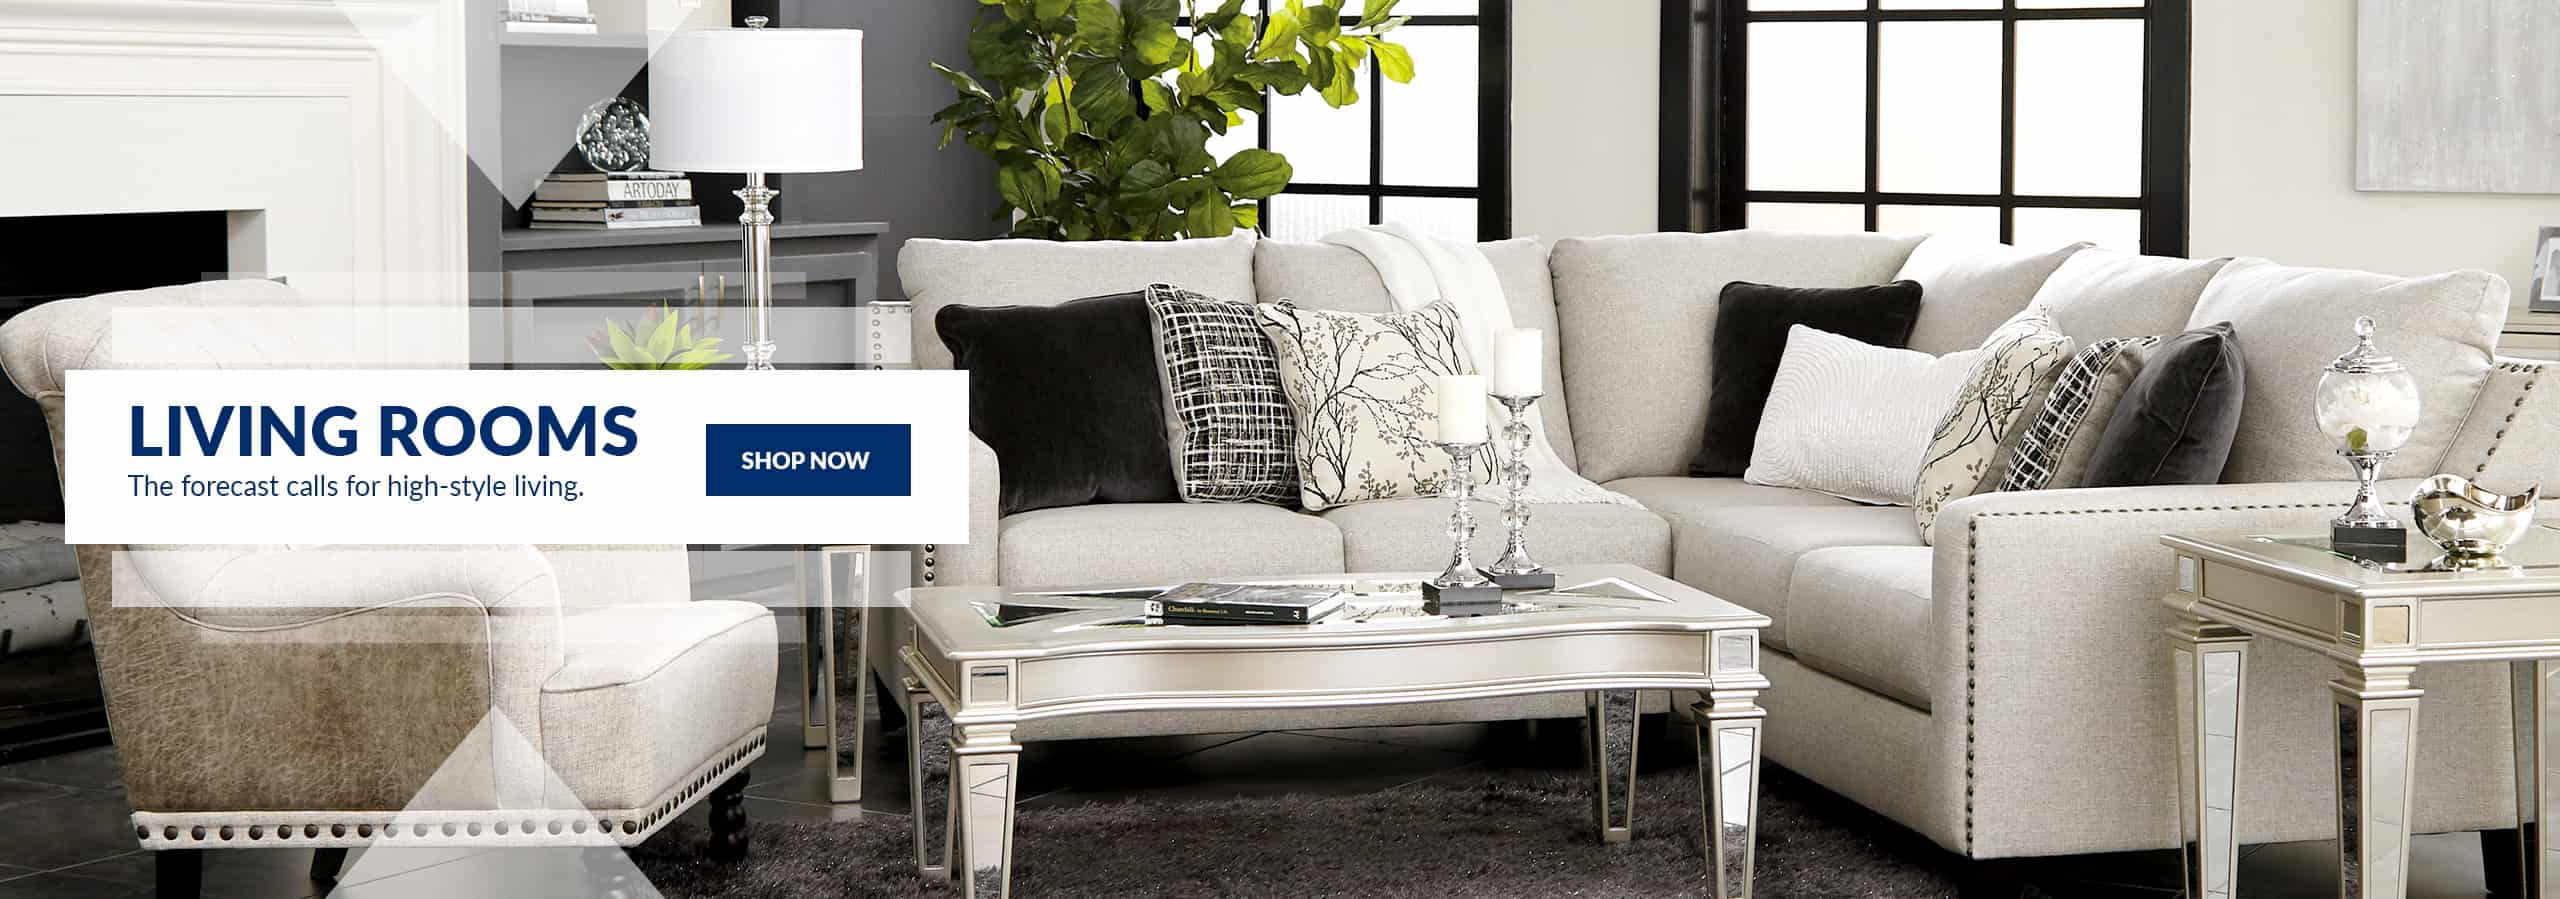 Living Rooms – Shop Now